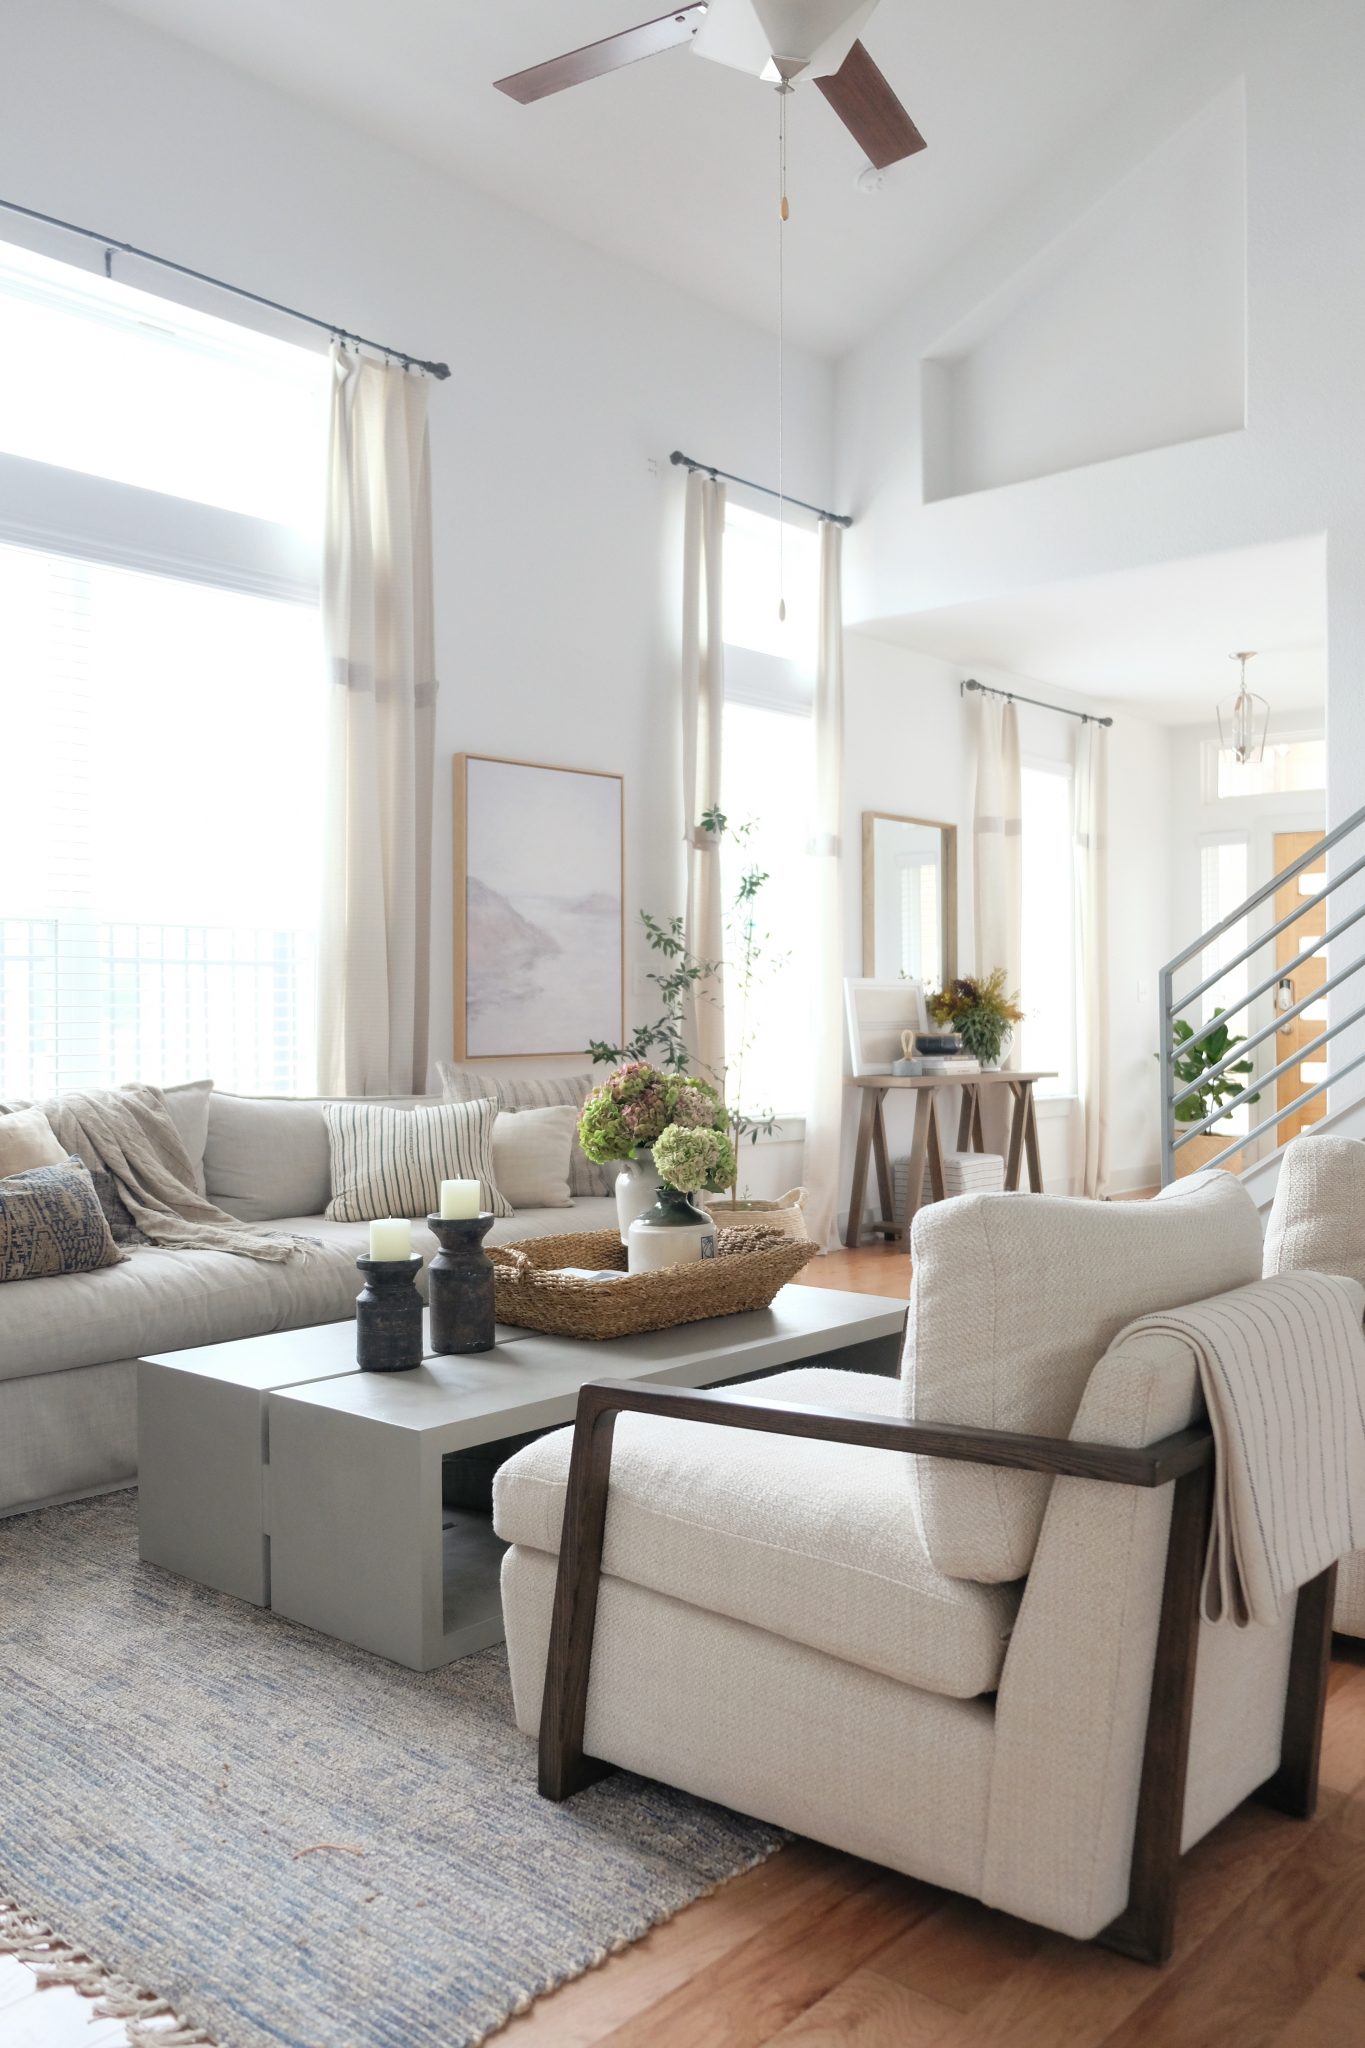 Mix & Match Living Room Furniture For A Curated Look - gold coast canvas